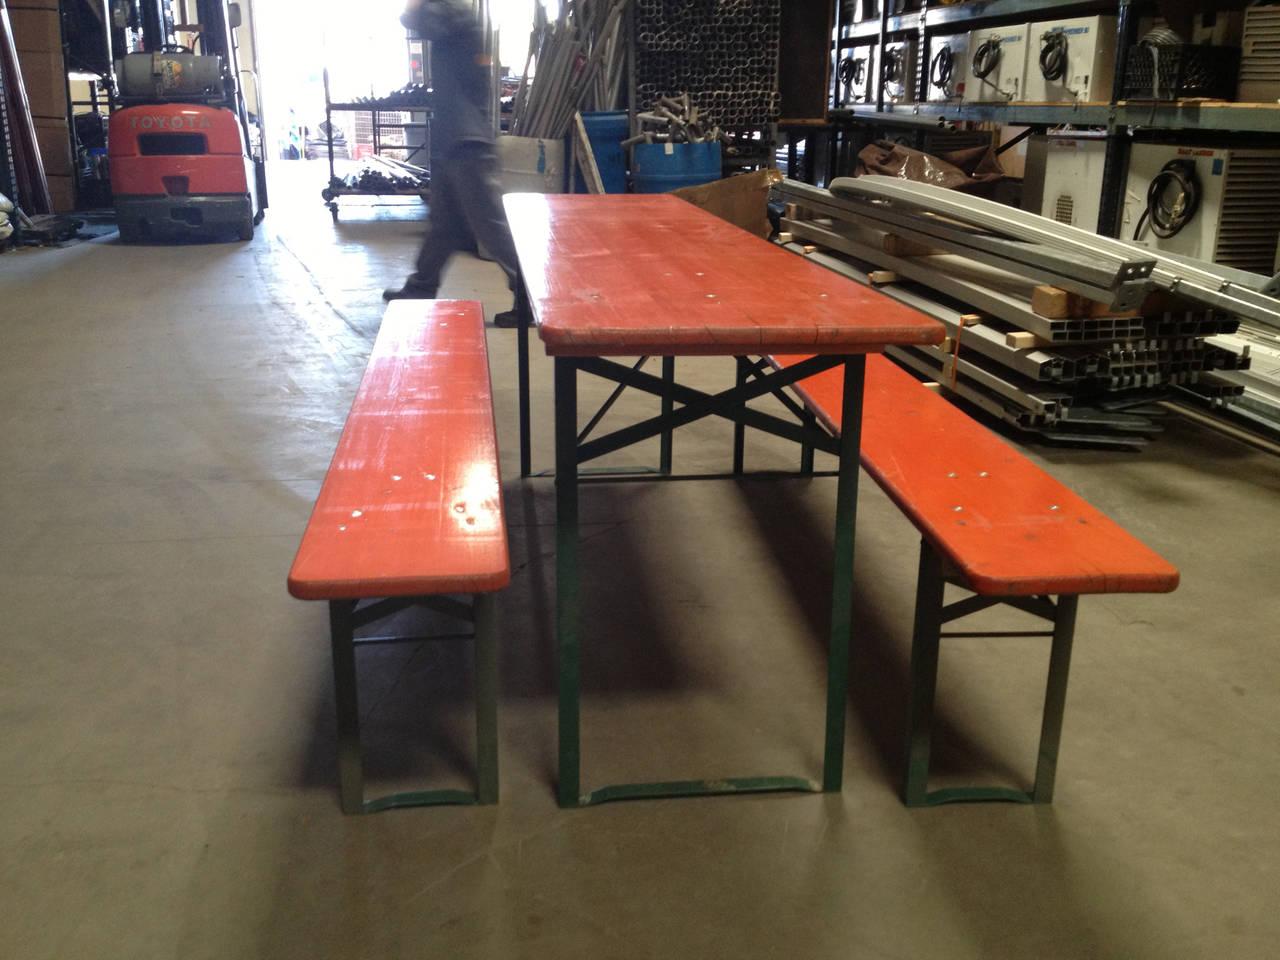 You receive (5) tables and 10 benches for the price listed plus free shipping to a business loading dock within the Continental US! Authentic Oktoberfest picnic table sets from the legendary beer halls of Germany. Great for brew pubs, restaurants,